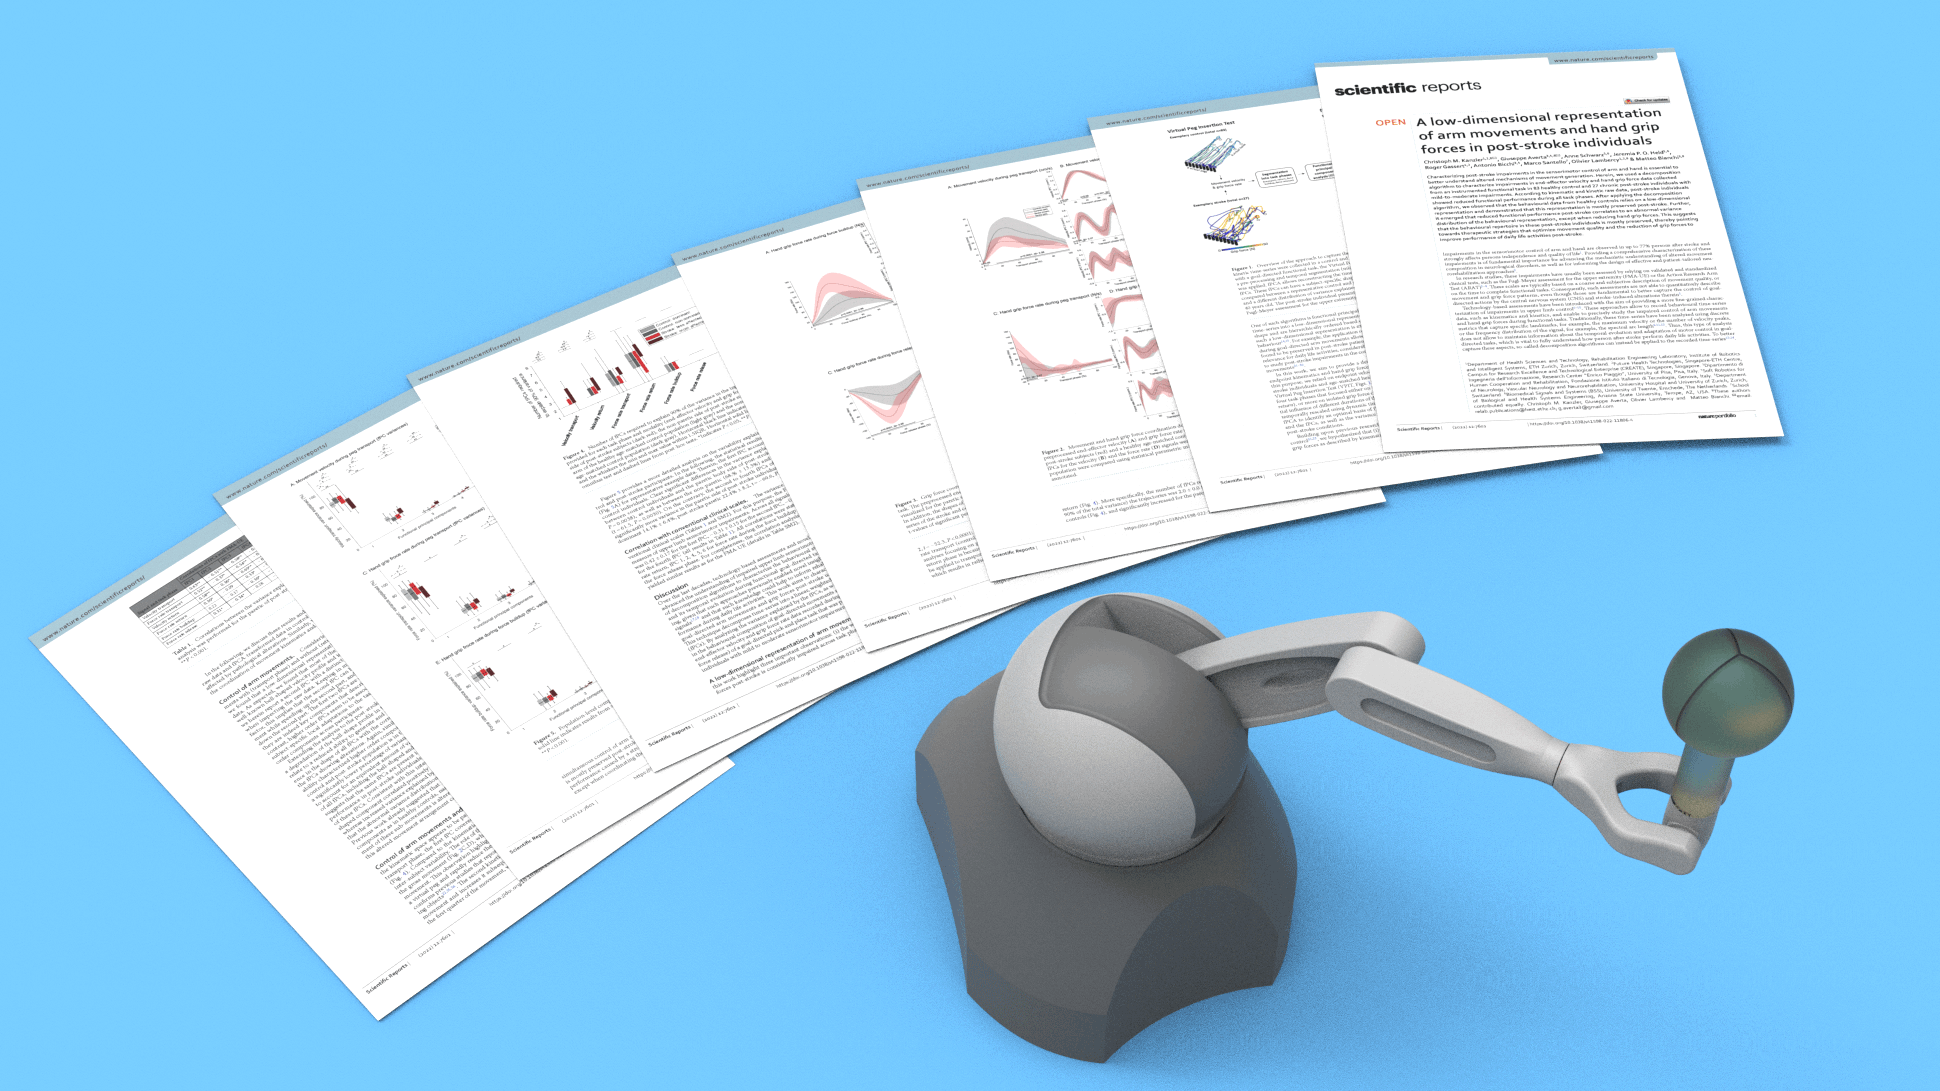 Enlarged view: 3D Visualisation with VPIT Device and Publication